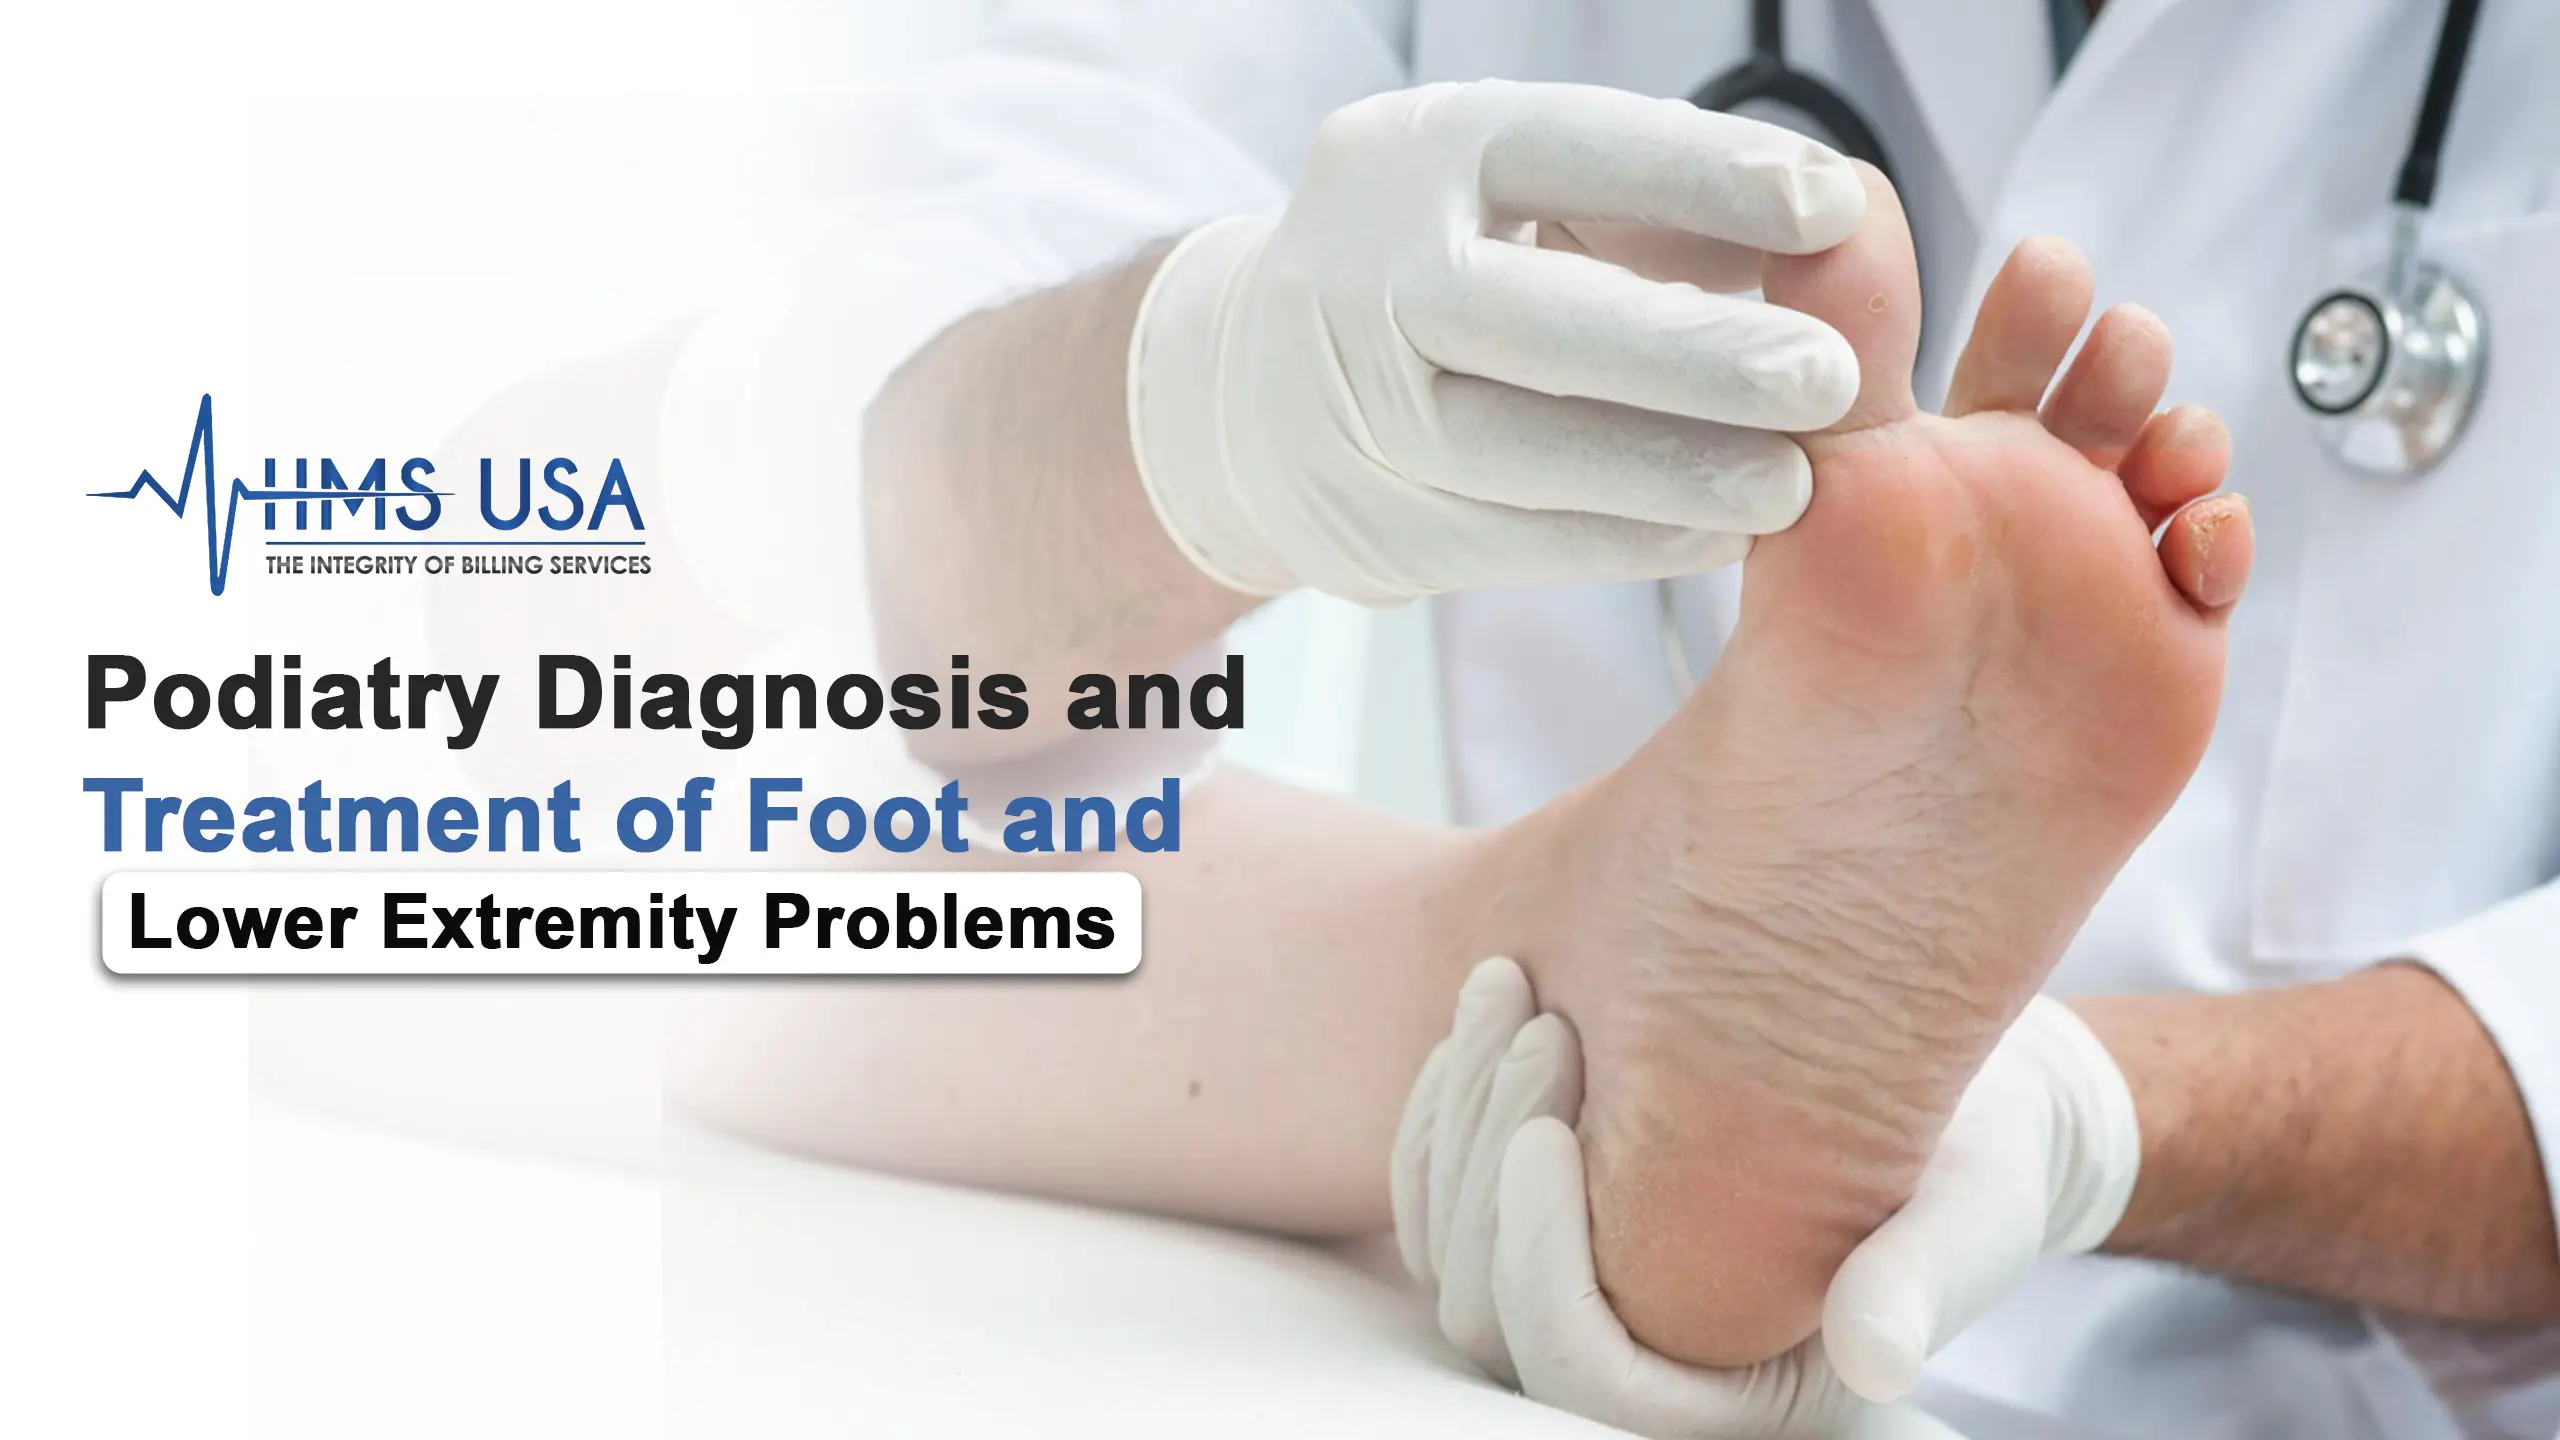 podiatry medical billing solutions - podiatry coding and billing - podiatry practice management